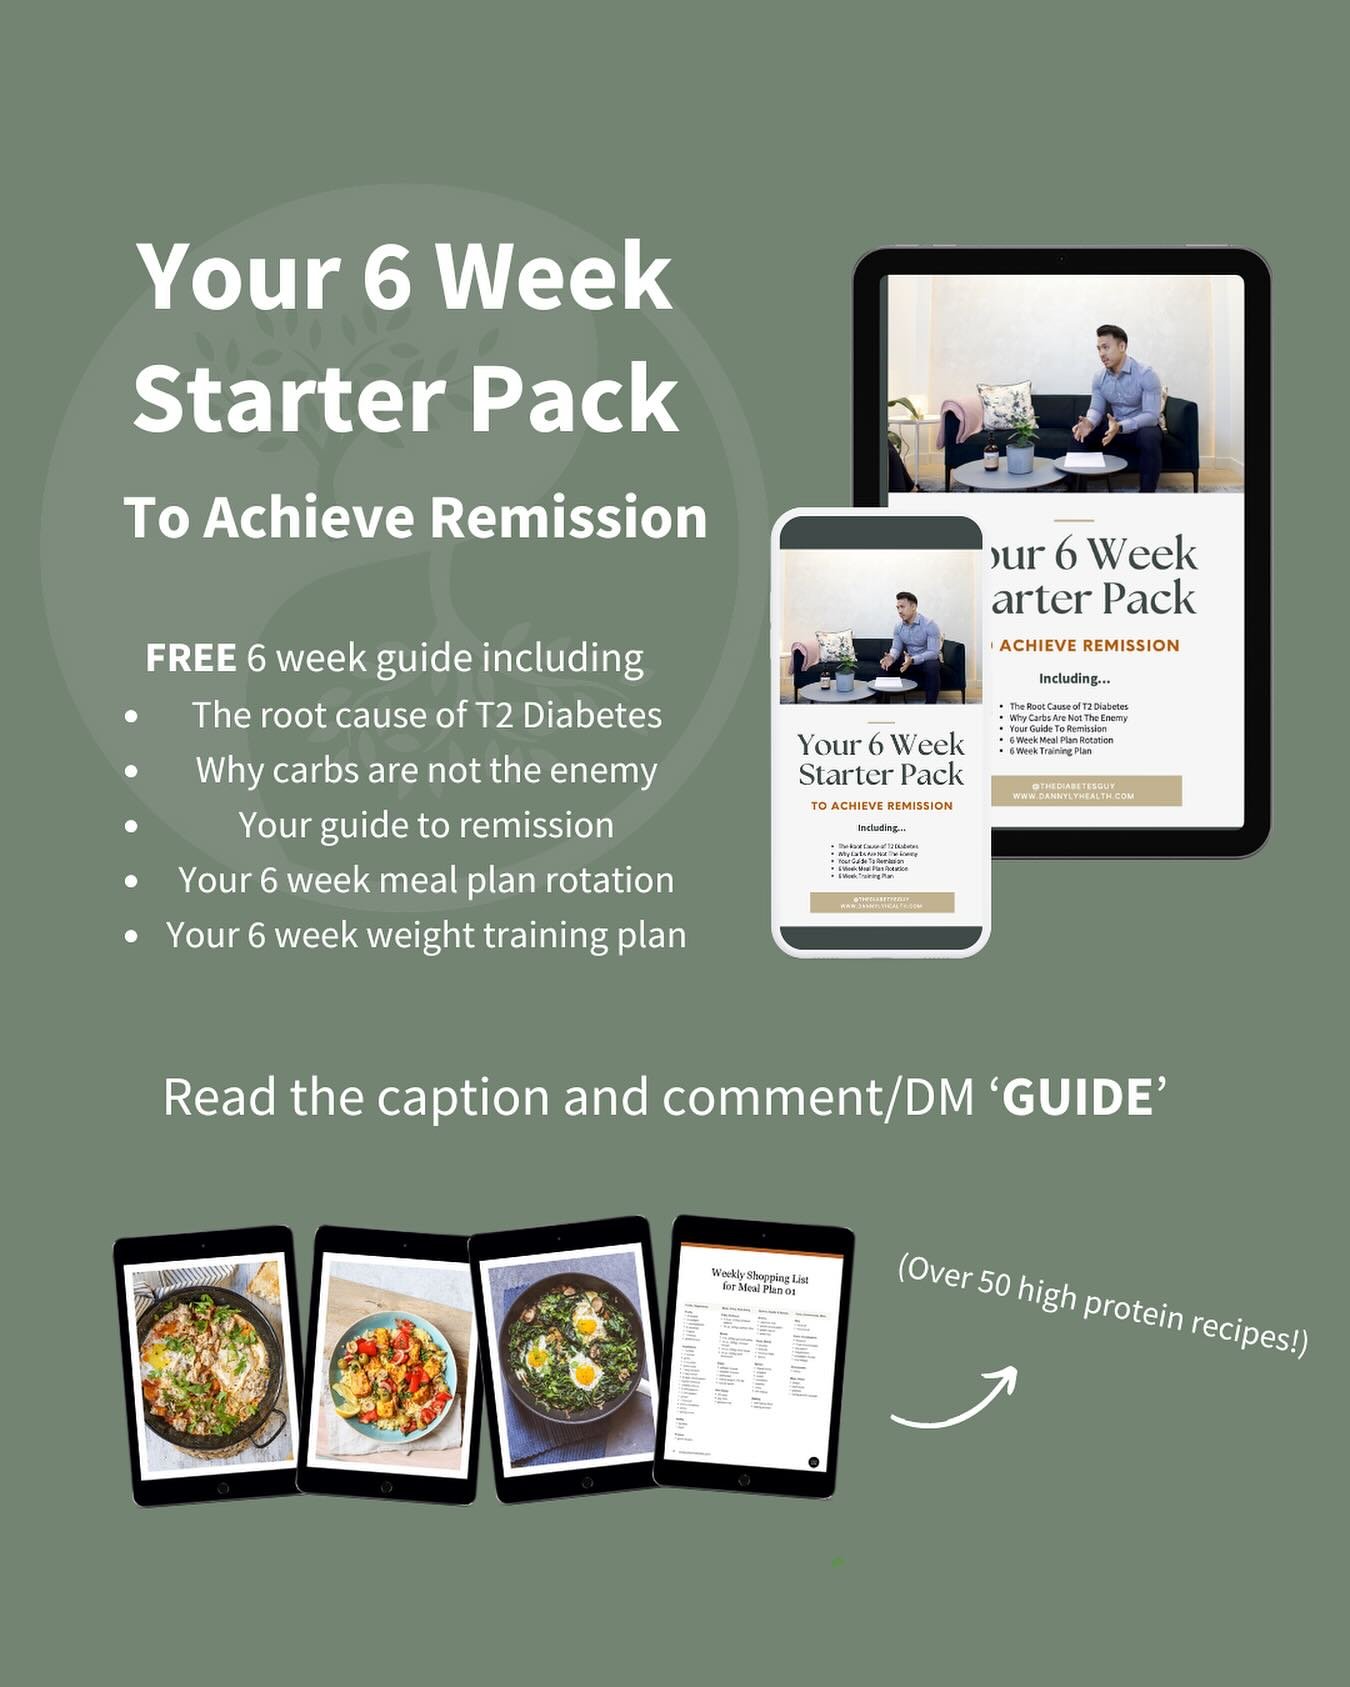 This is without doubt, the most valuable and complete resource I&rsquo;ve ever given away.

If you&rsquo;re struggling with motivation or consistency, then this will be PERFECT for you.

Inside this gem of a starter pack, I give you&hellip;

⭐️ The r